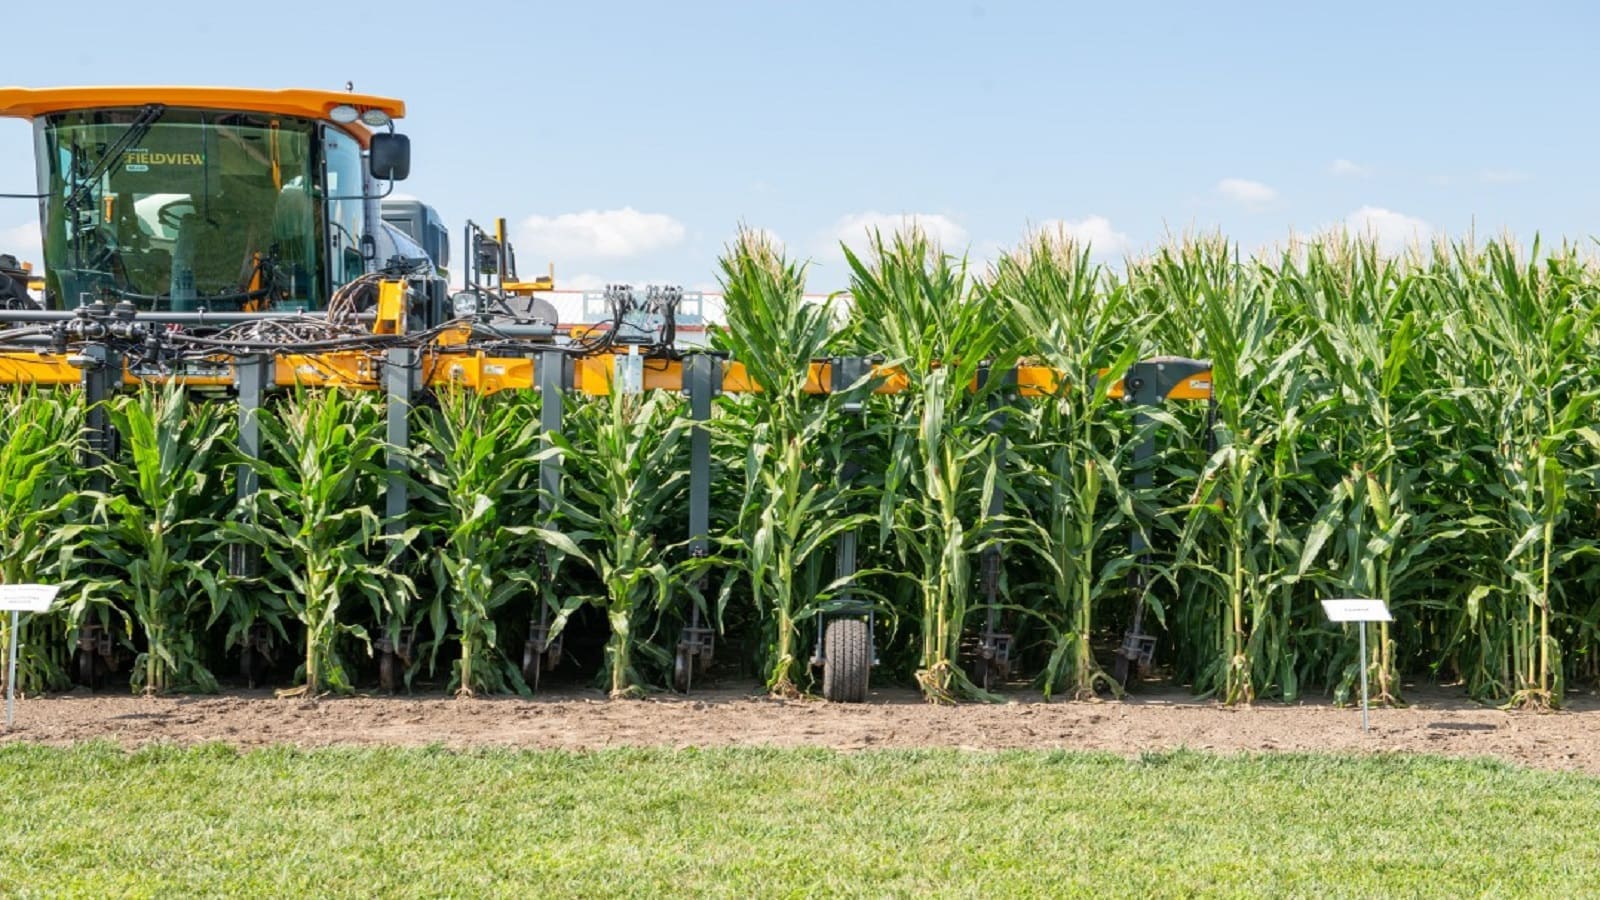 Bayer partners Pairwise for gene editing to develop short-stature corn